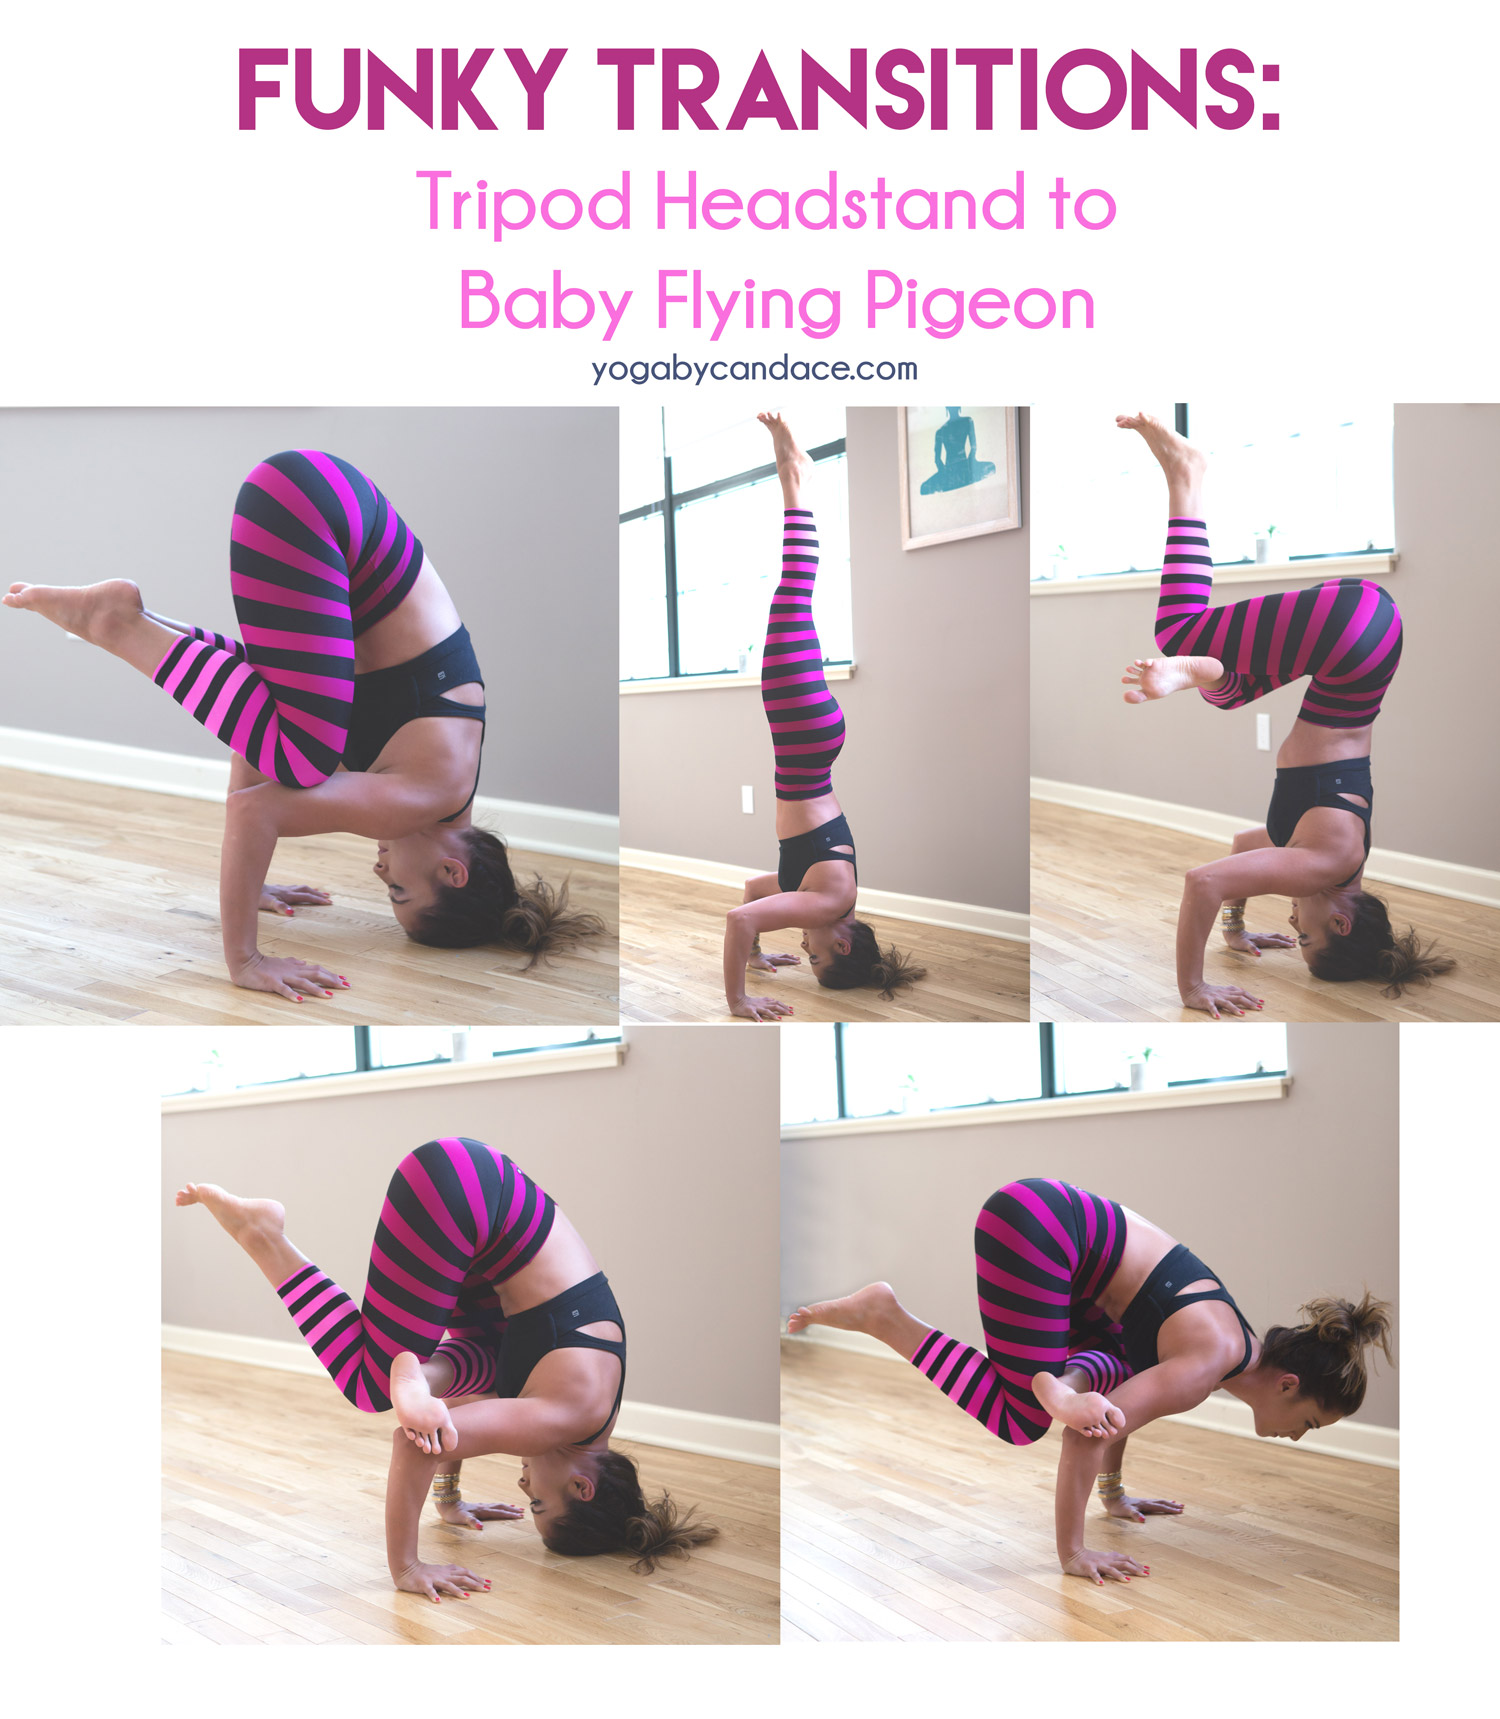 30-Min Beginners' Yoga Routine & Transitions Instruction For Coordination.